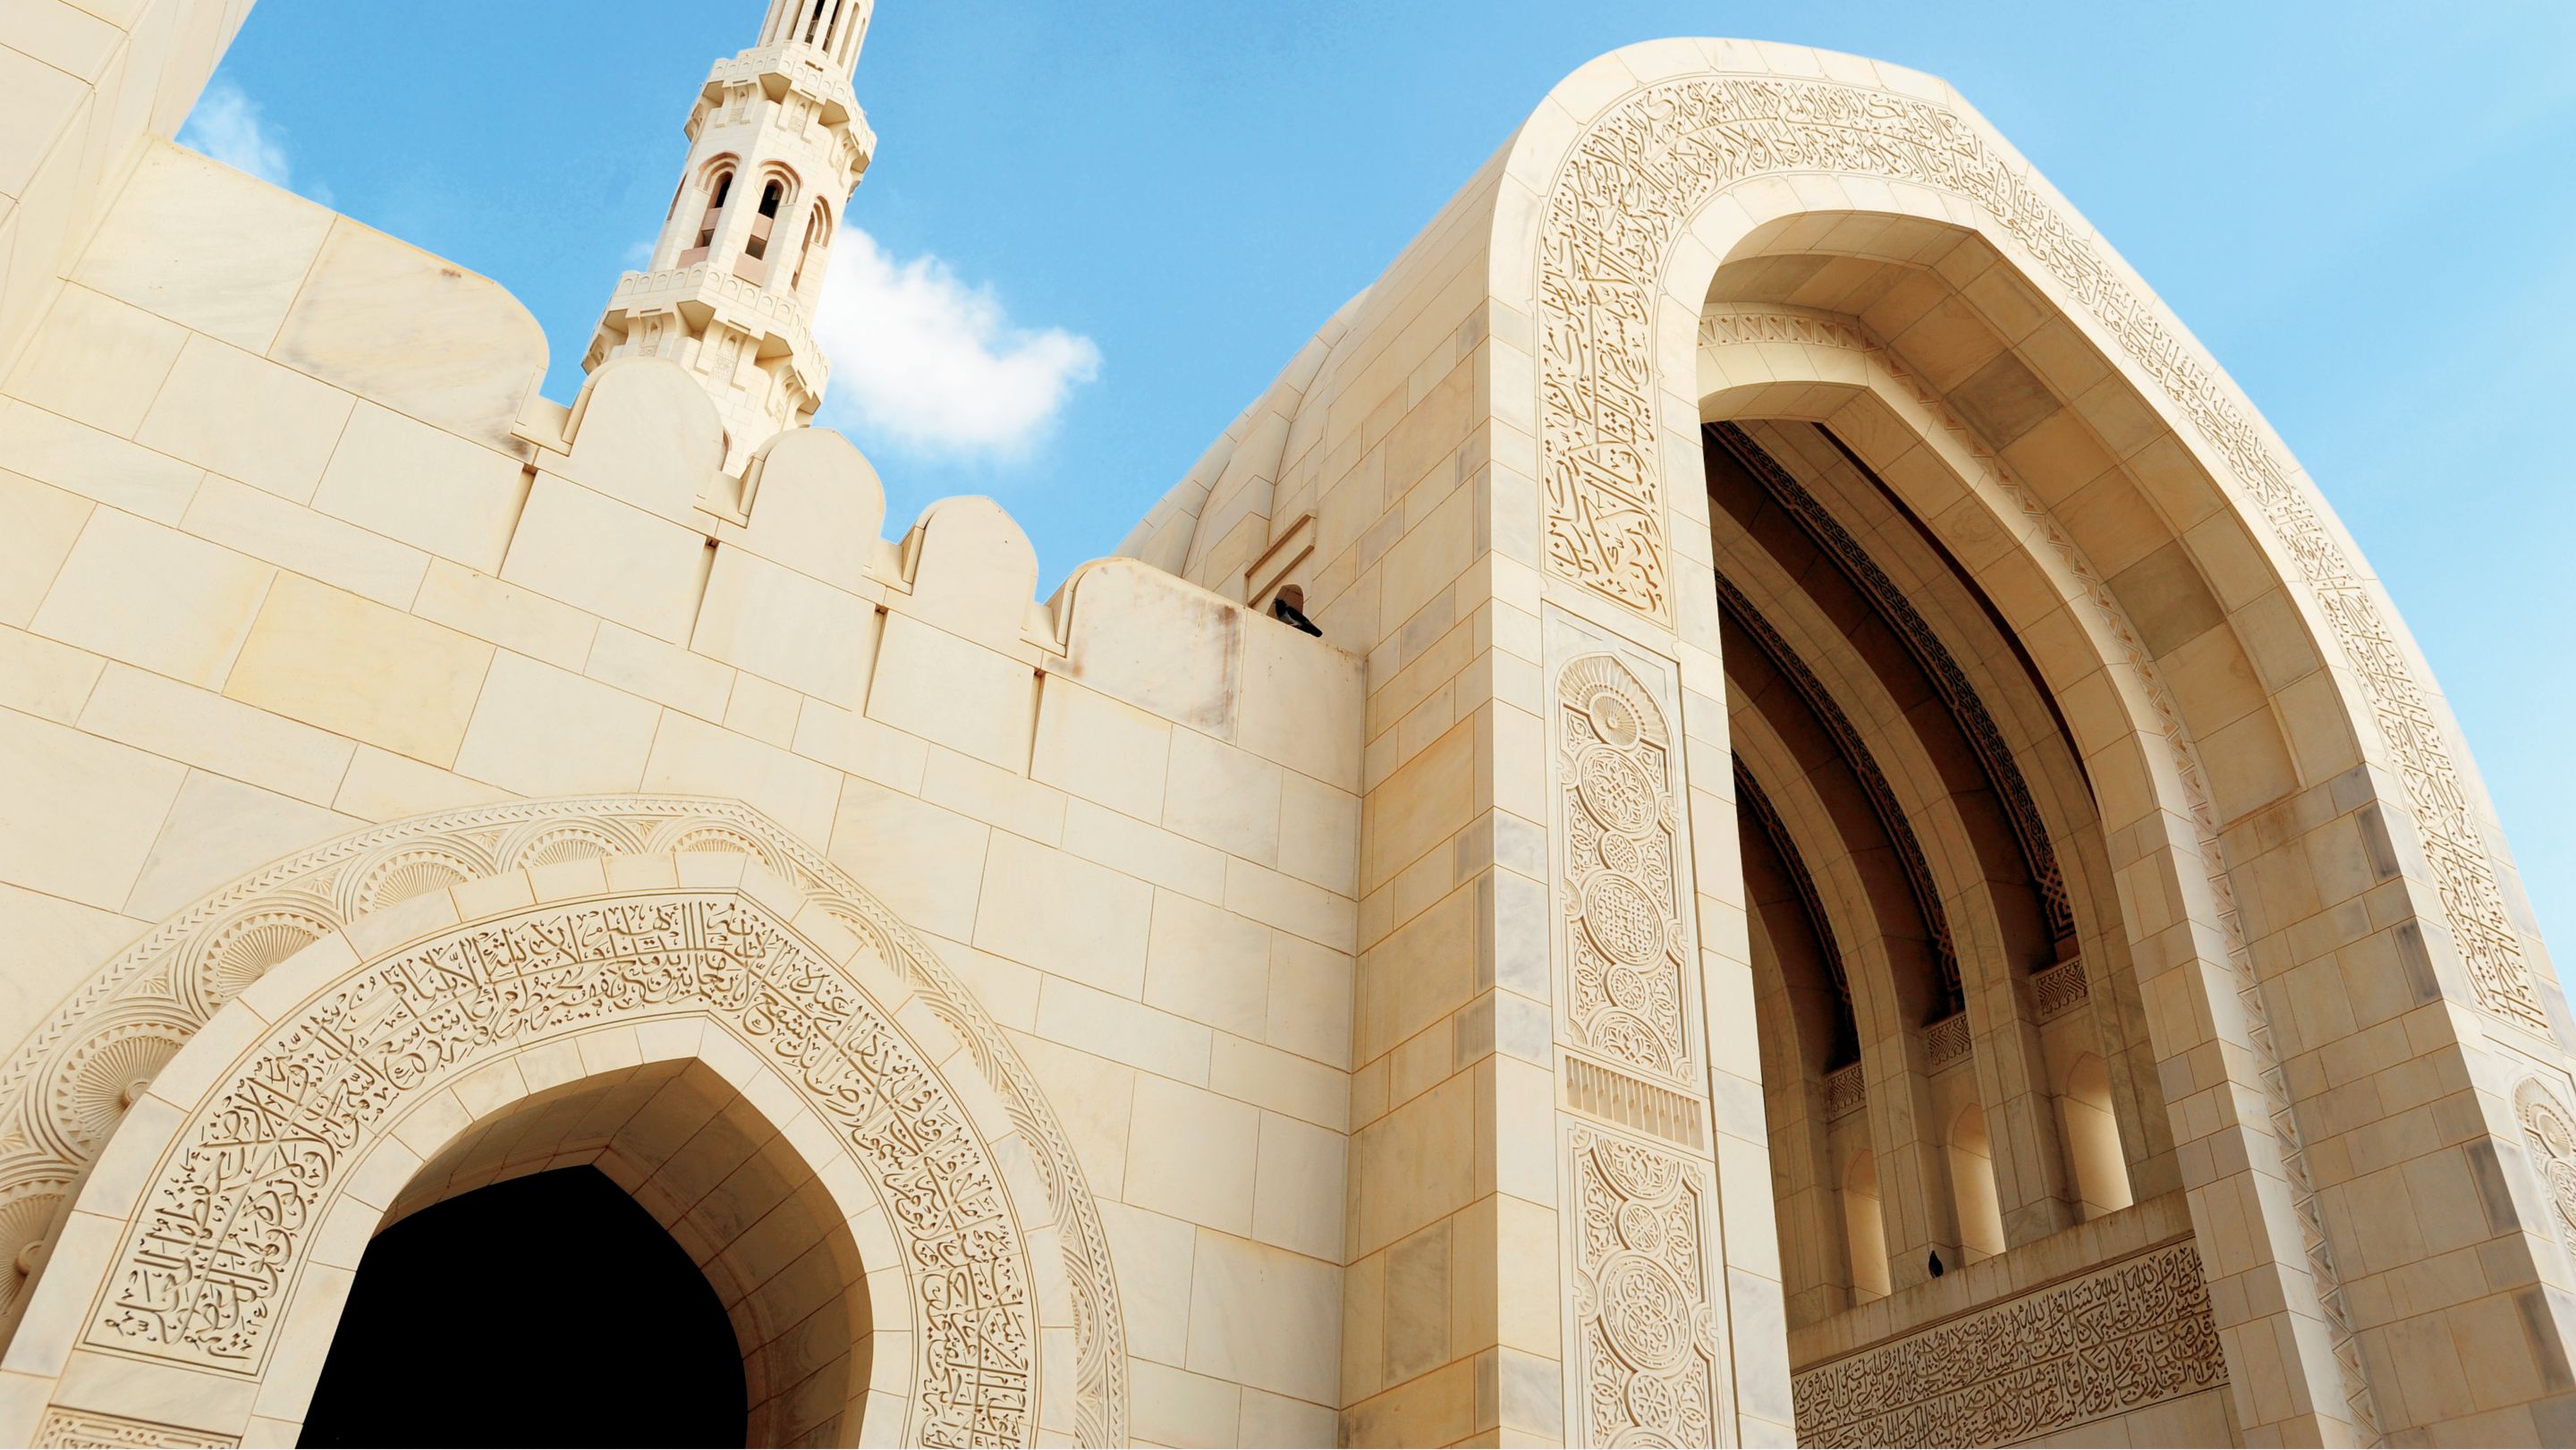 Upward view of a grand mosque built in white stone with a minaret and blue skies in the background